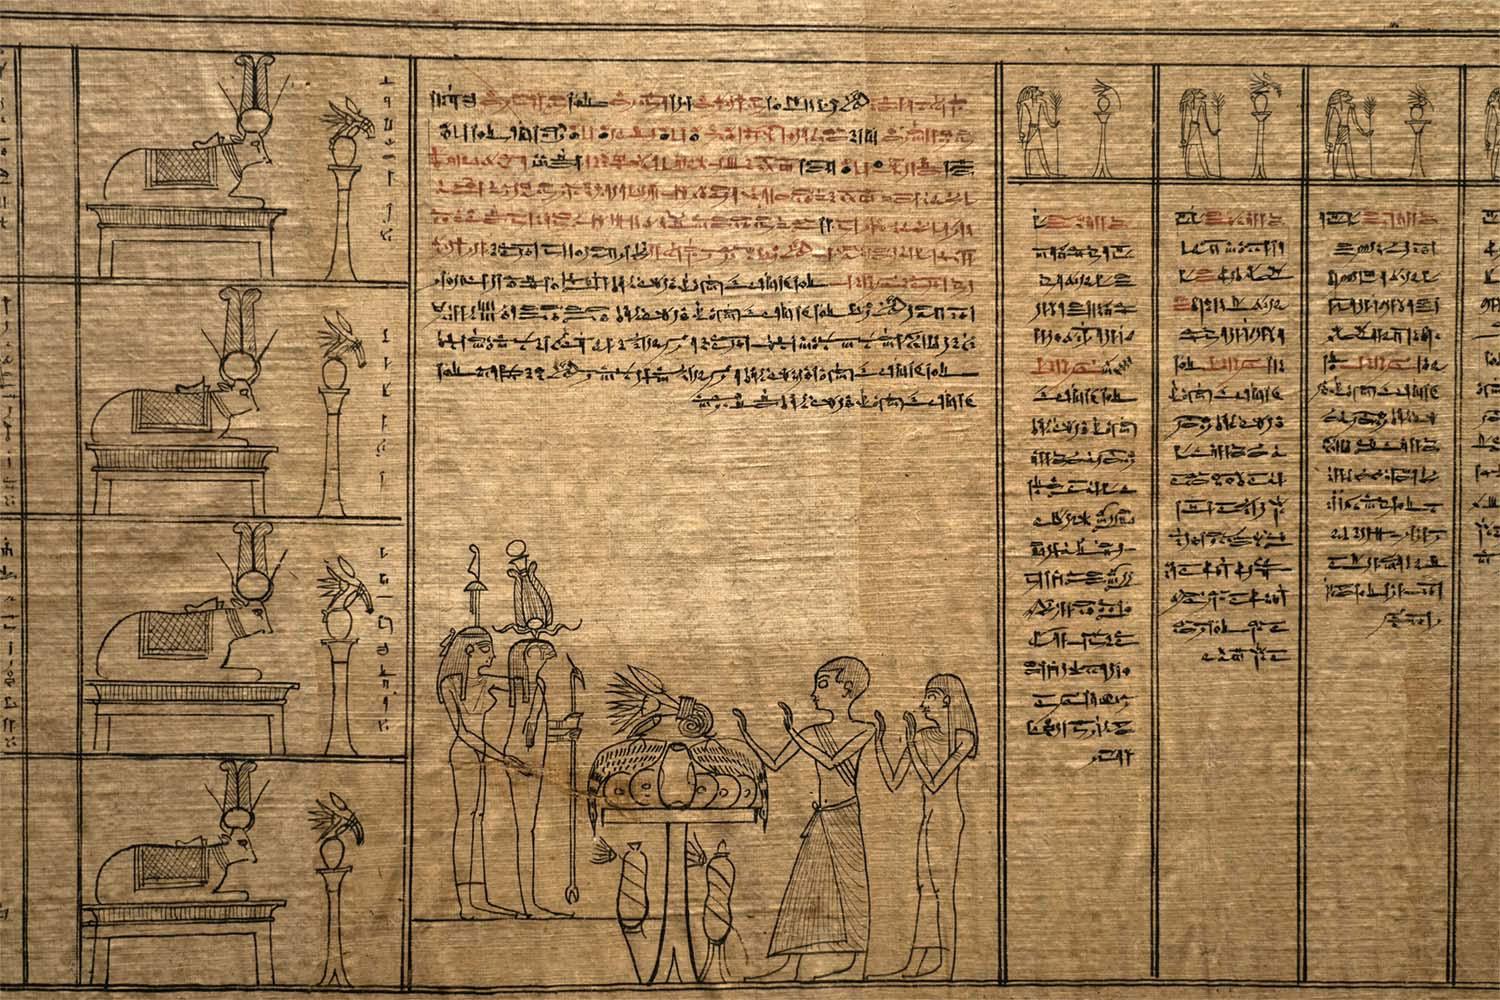 Waziry Papyrus contains around 113 spells from the Book of the Dead